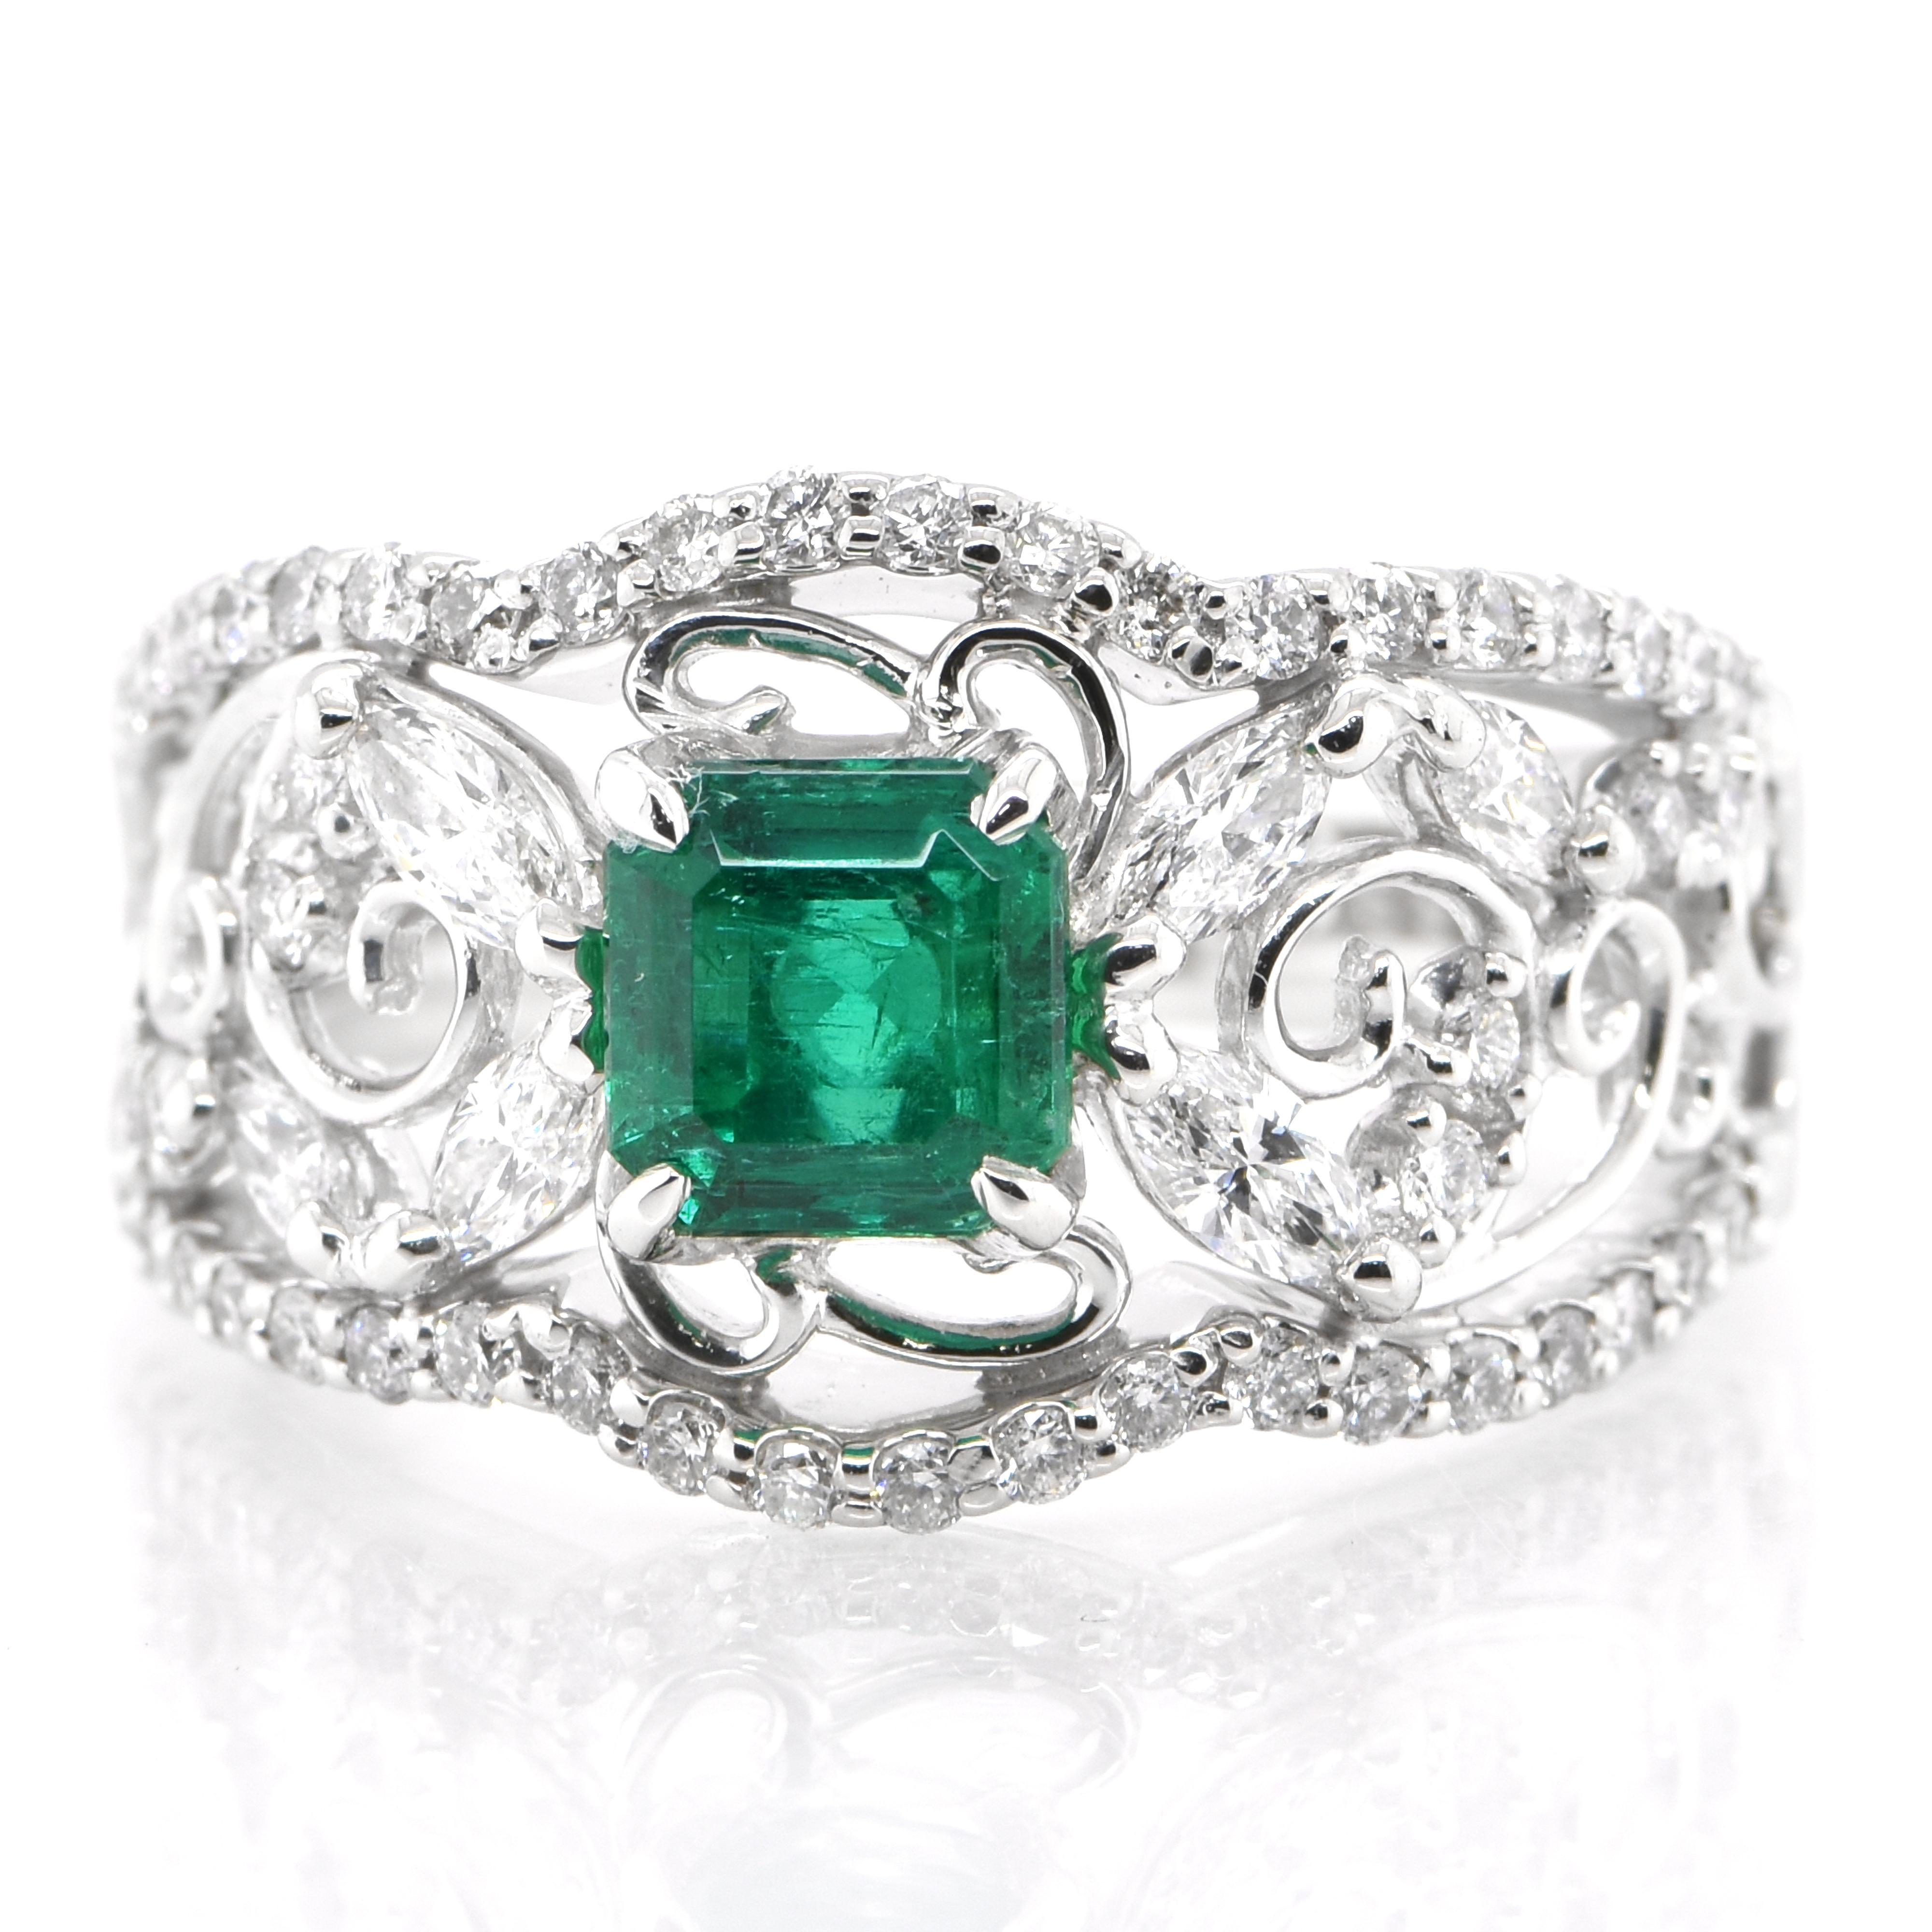 A stunning ring featuring a 0.86 Carat Natural Sugarloaf Emerald and 0.75 Carats of Diamond Accents set in Platinum. People have admired emerald’s green for thousands of years. Emeralds have always been associated with the lushest landscapes and the